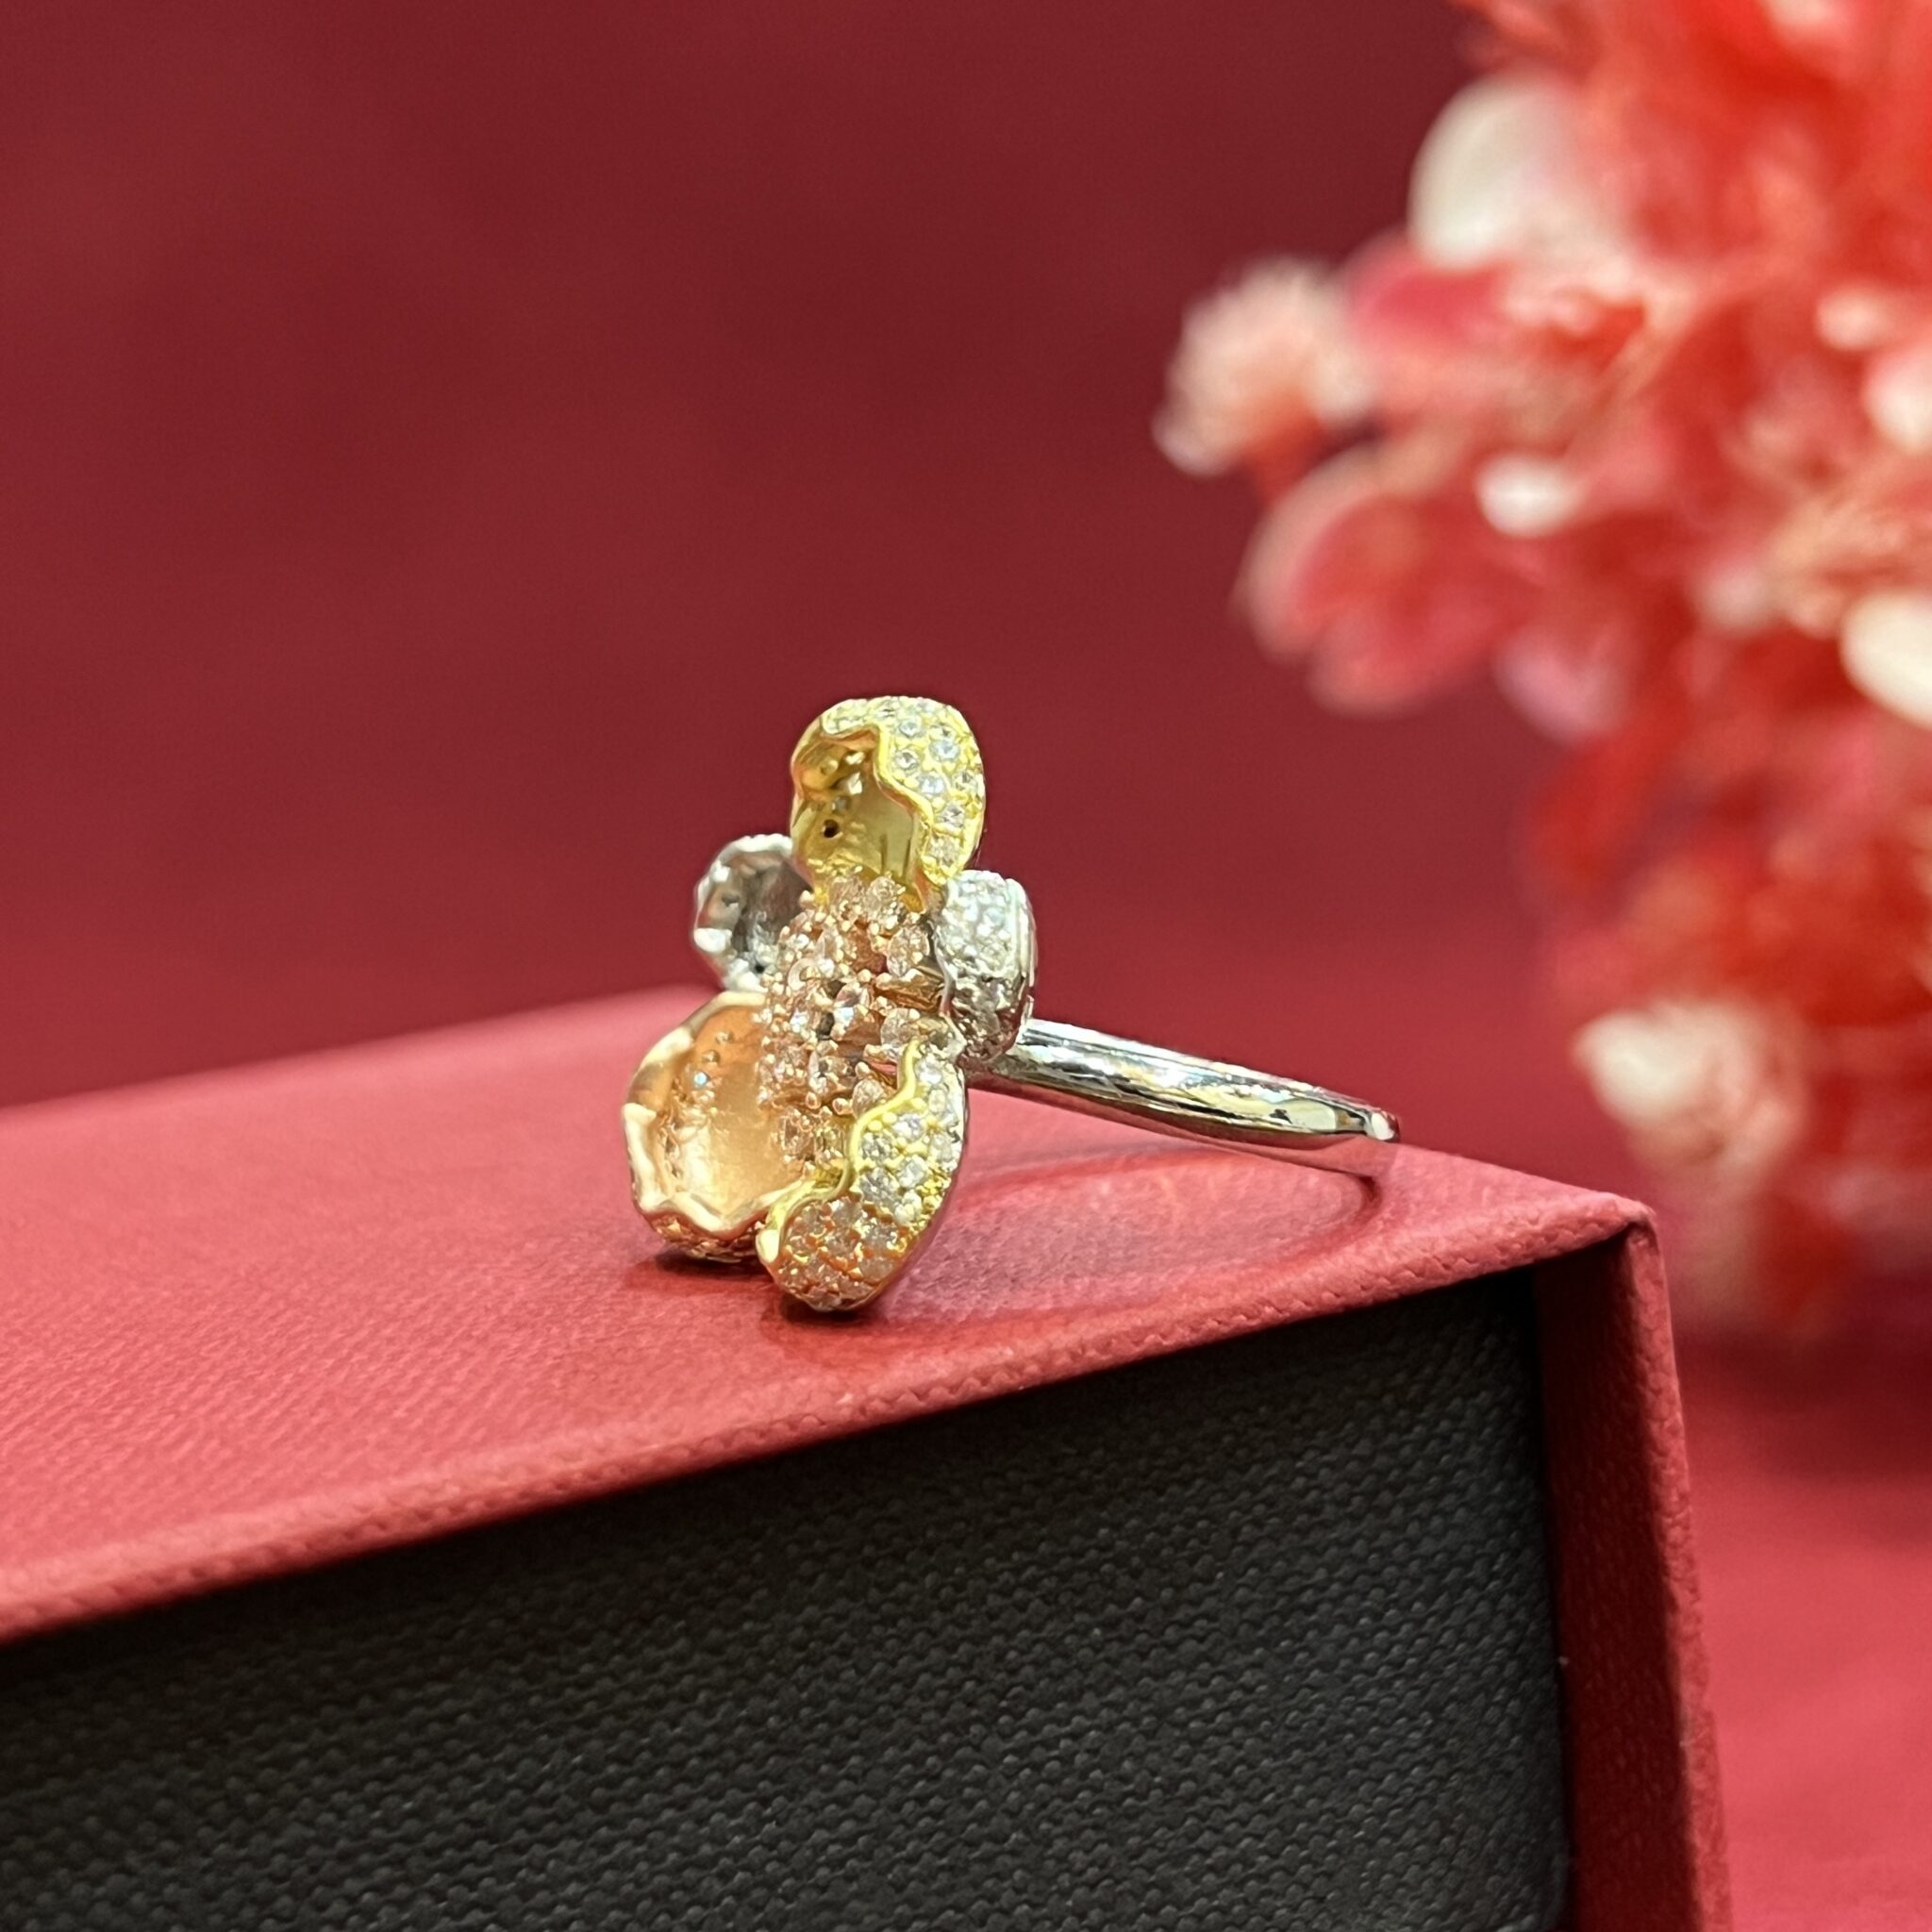 Buy 14K Real Gold Teddy Bear Ring With Red CZ Online in India - Etsy